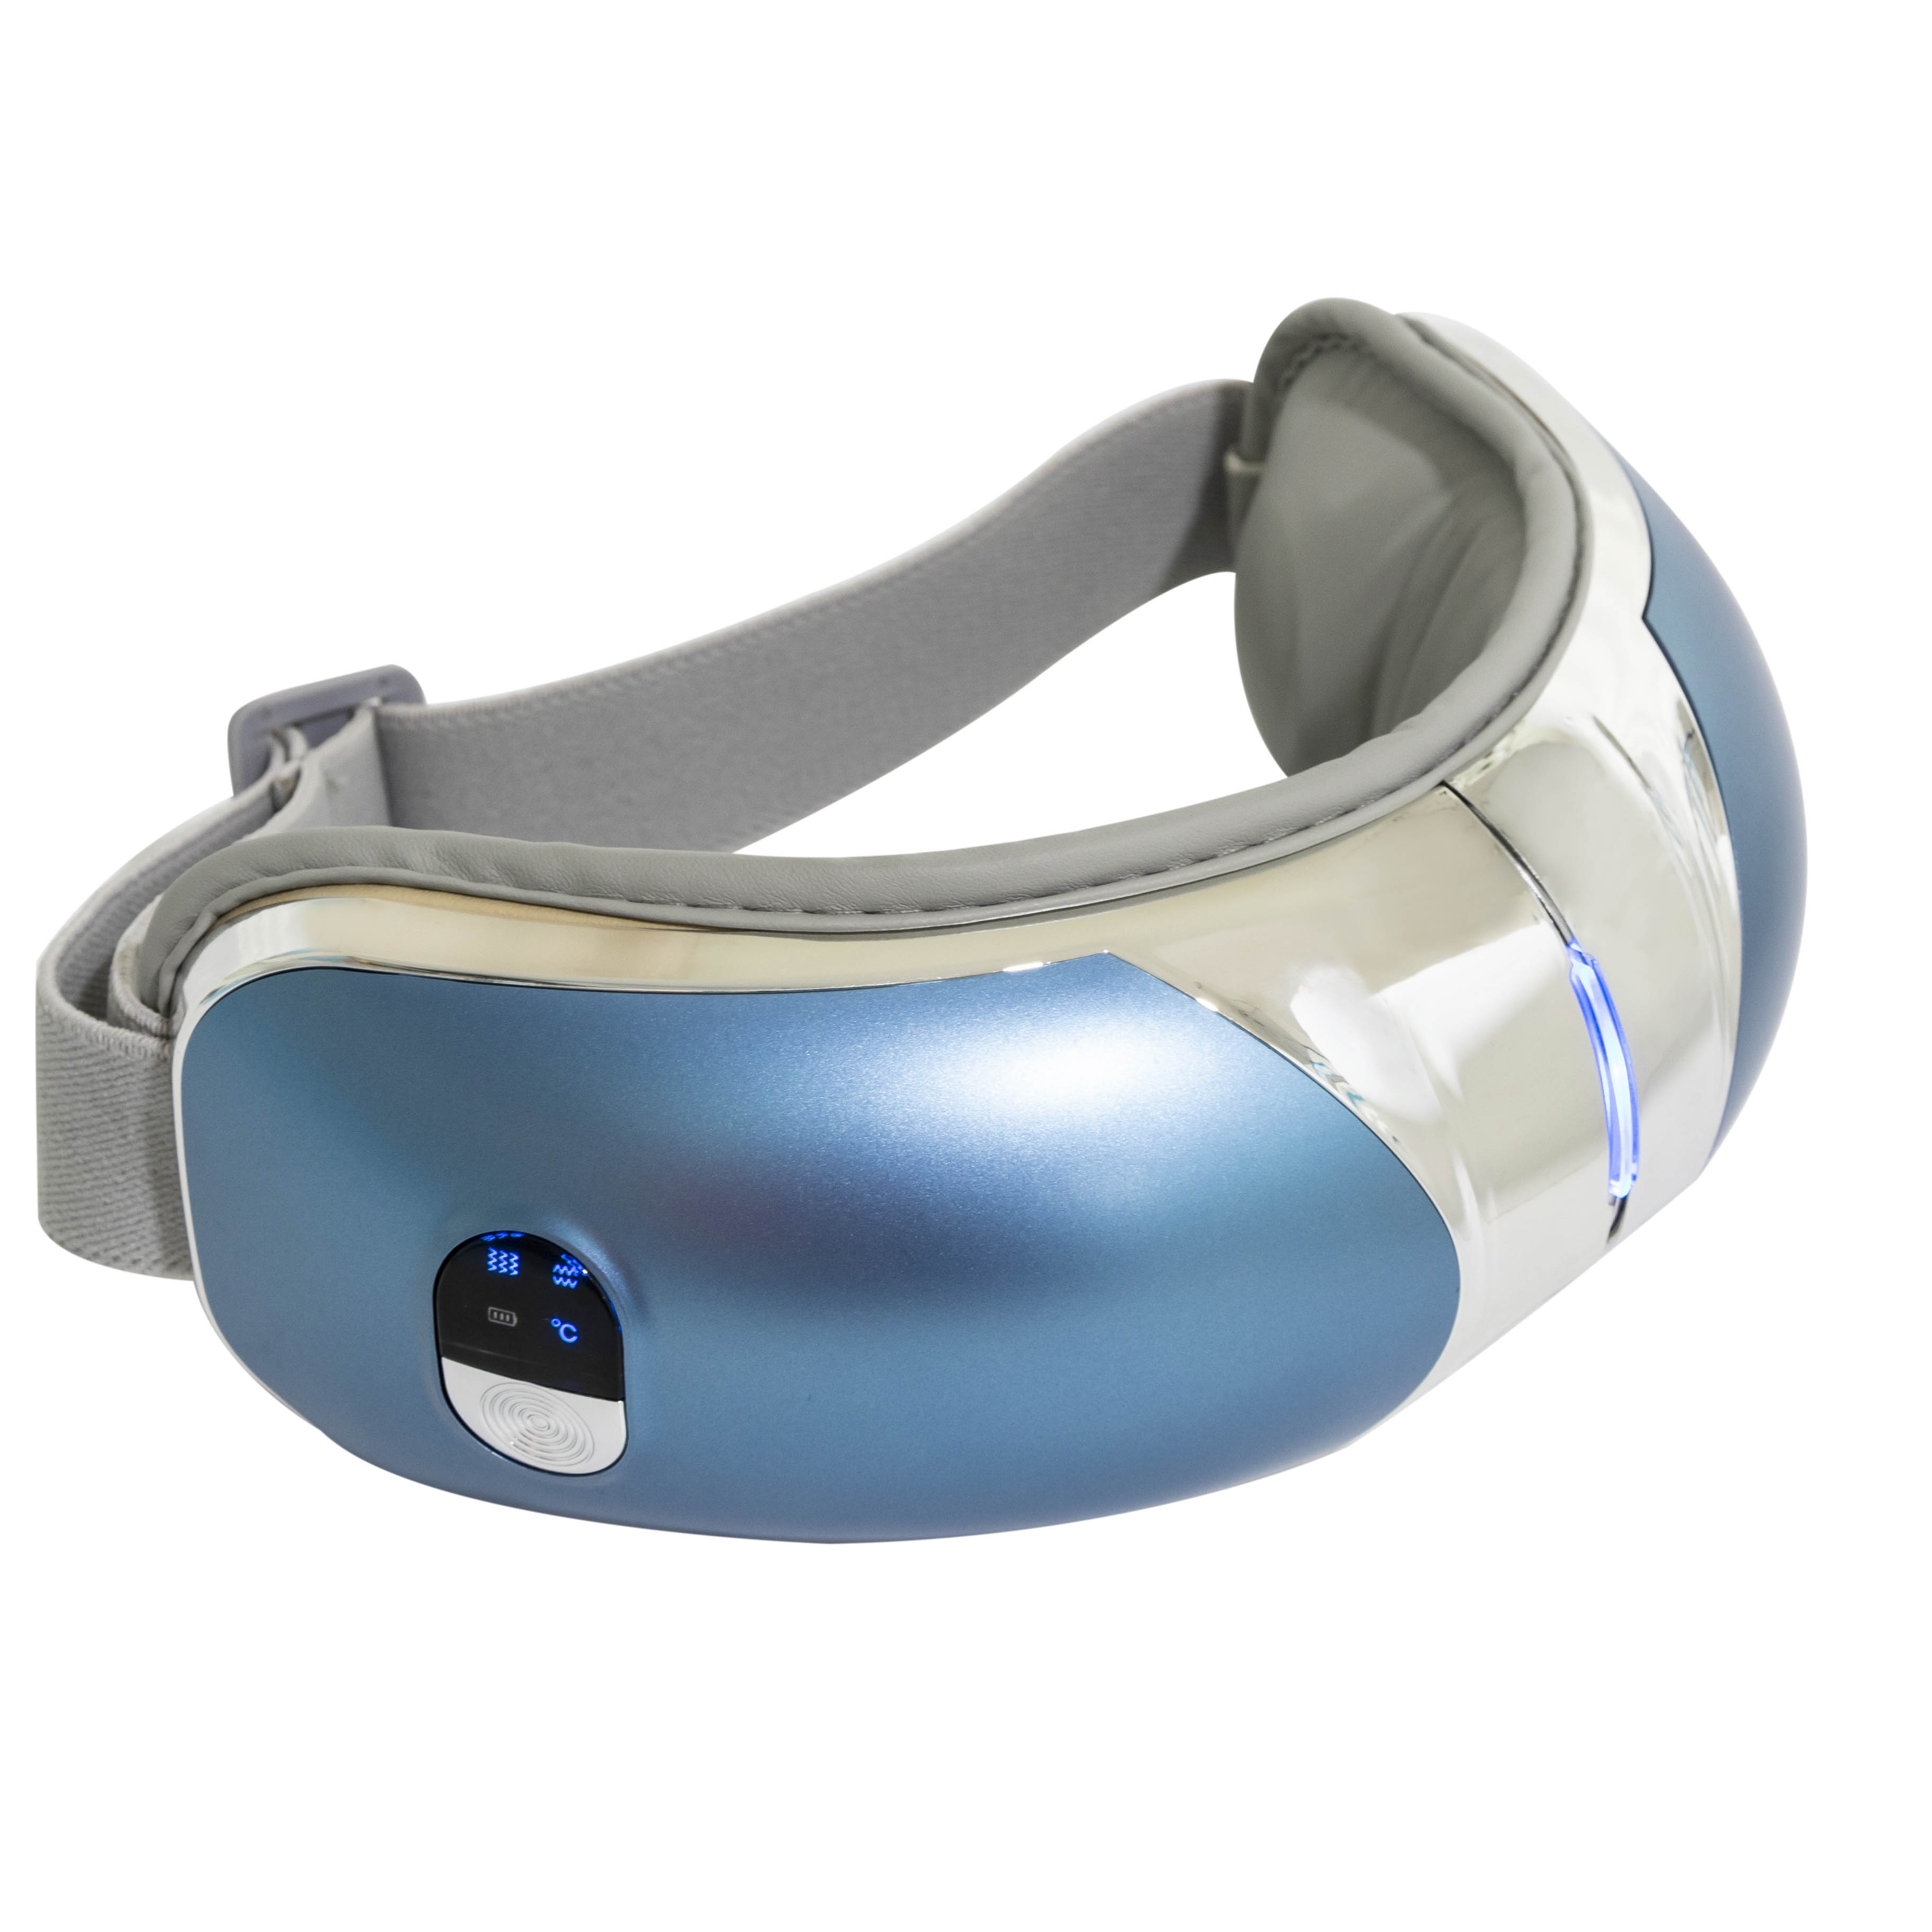 Remote Control Portable Eye Massager For Dry Eyes